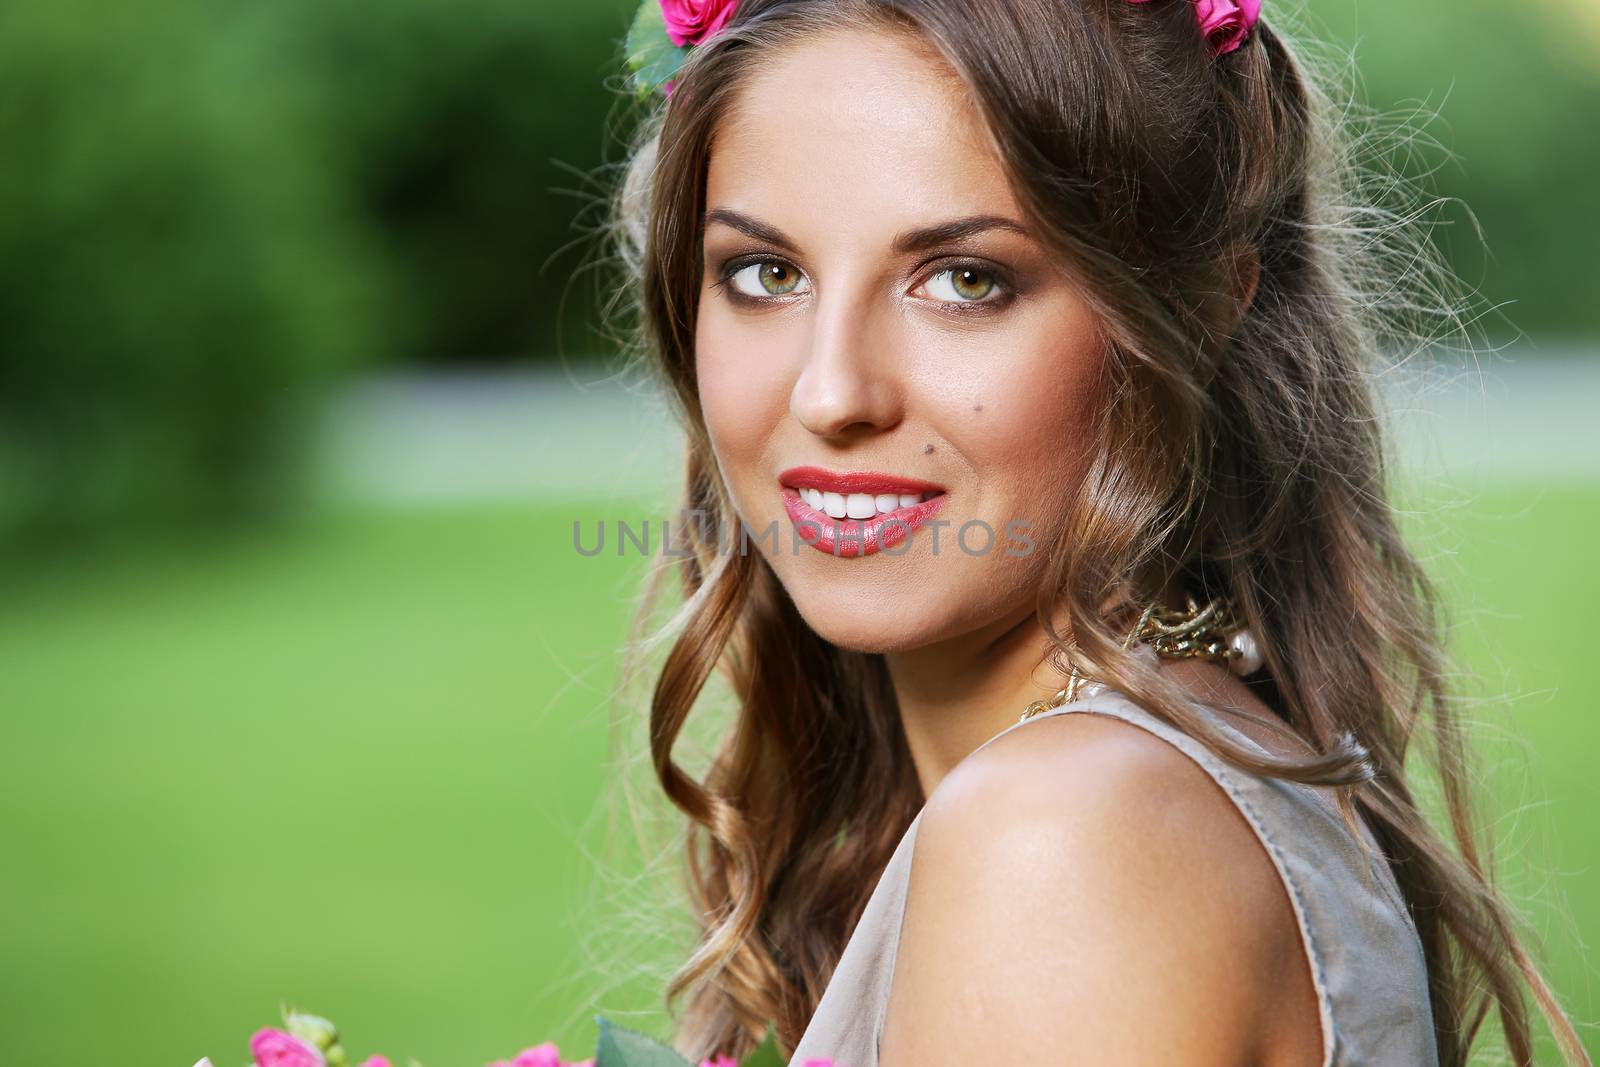 Portrait of a beautiful girl holding bouquet of flowers in the park